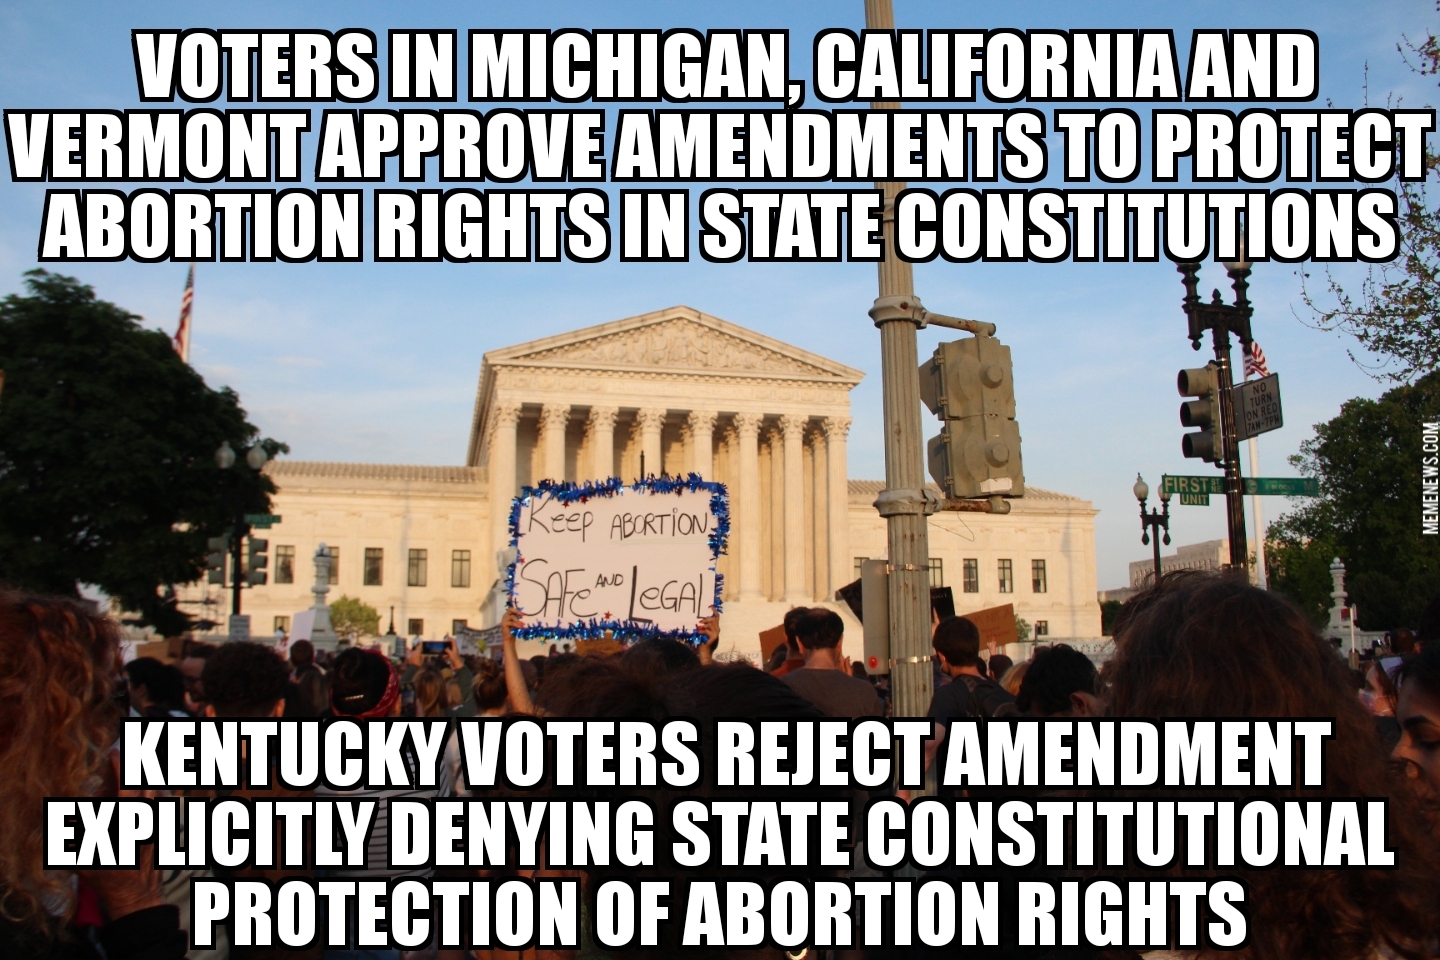 States approve abortion rights amendments